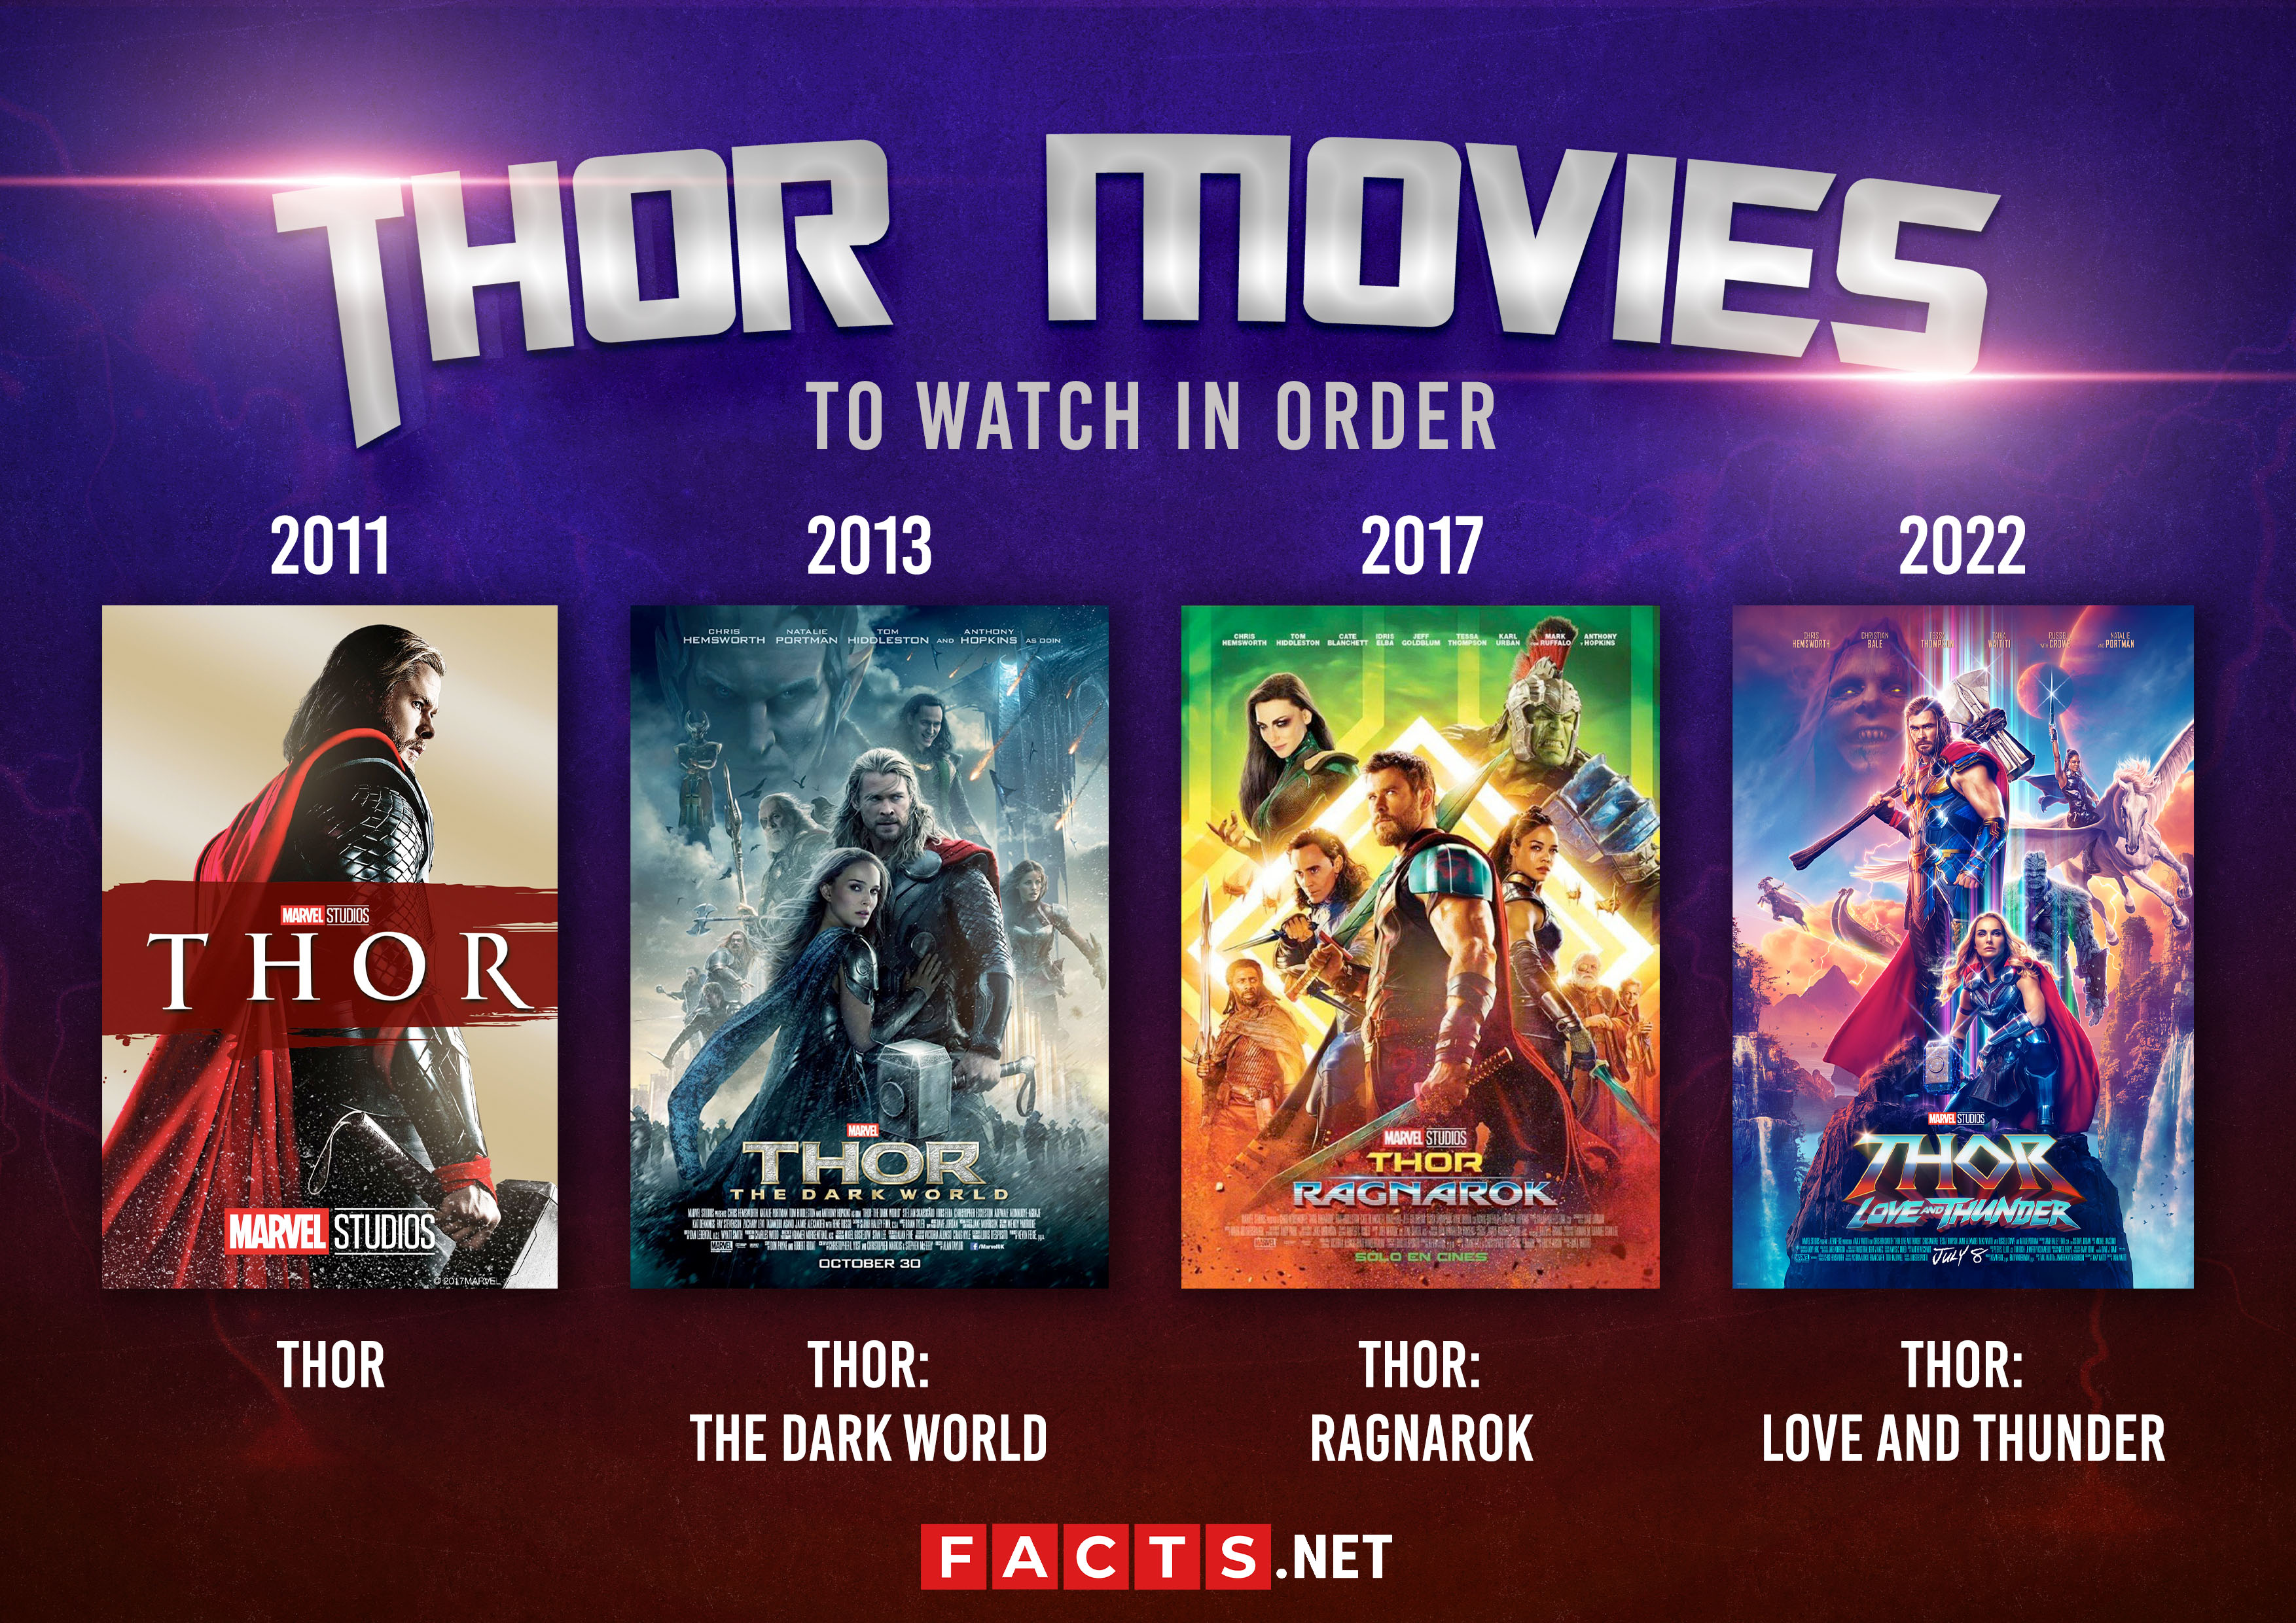 How To Watch Thor Movies in Order 